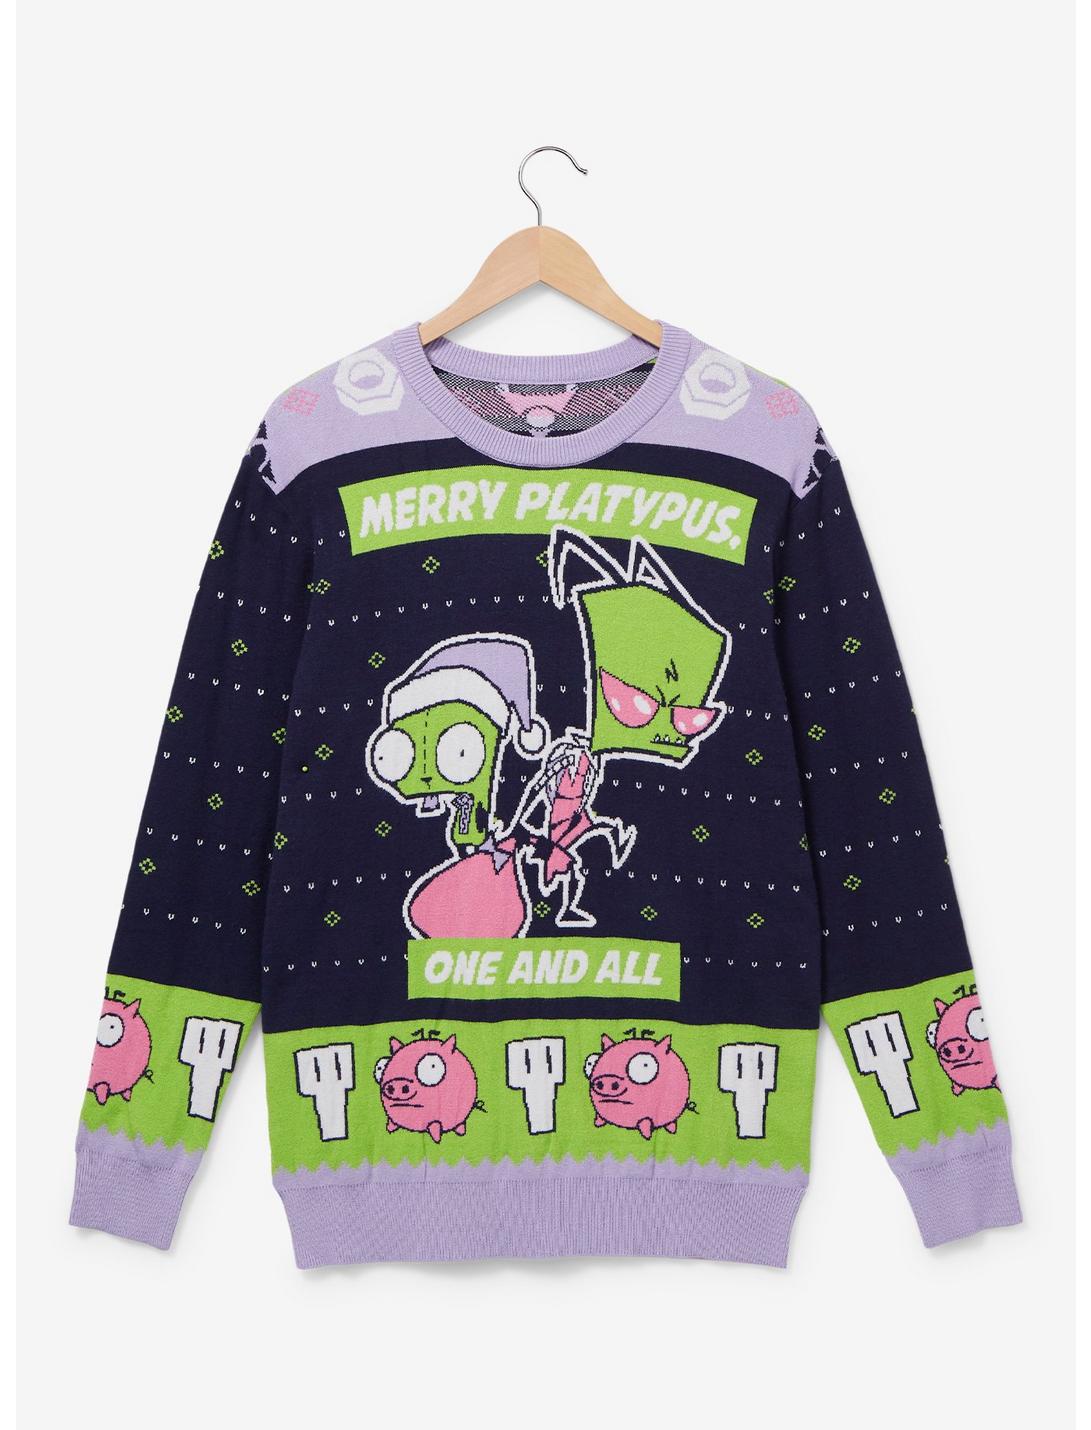 Invader Zim GIR and Zim Merry Platypus Holiday Sweater - BoxLunch Exclusive, LILAC, hi-res